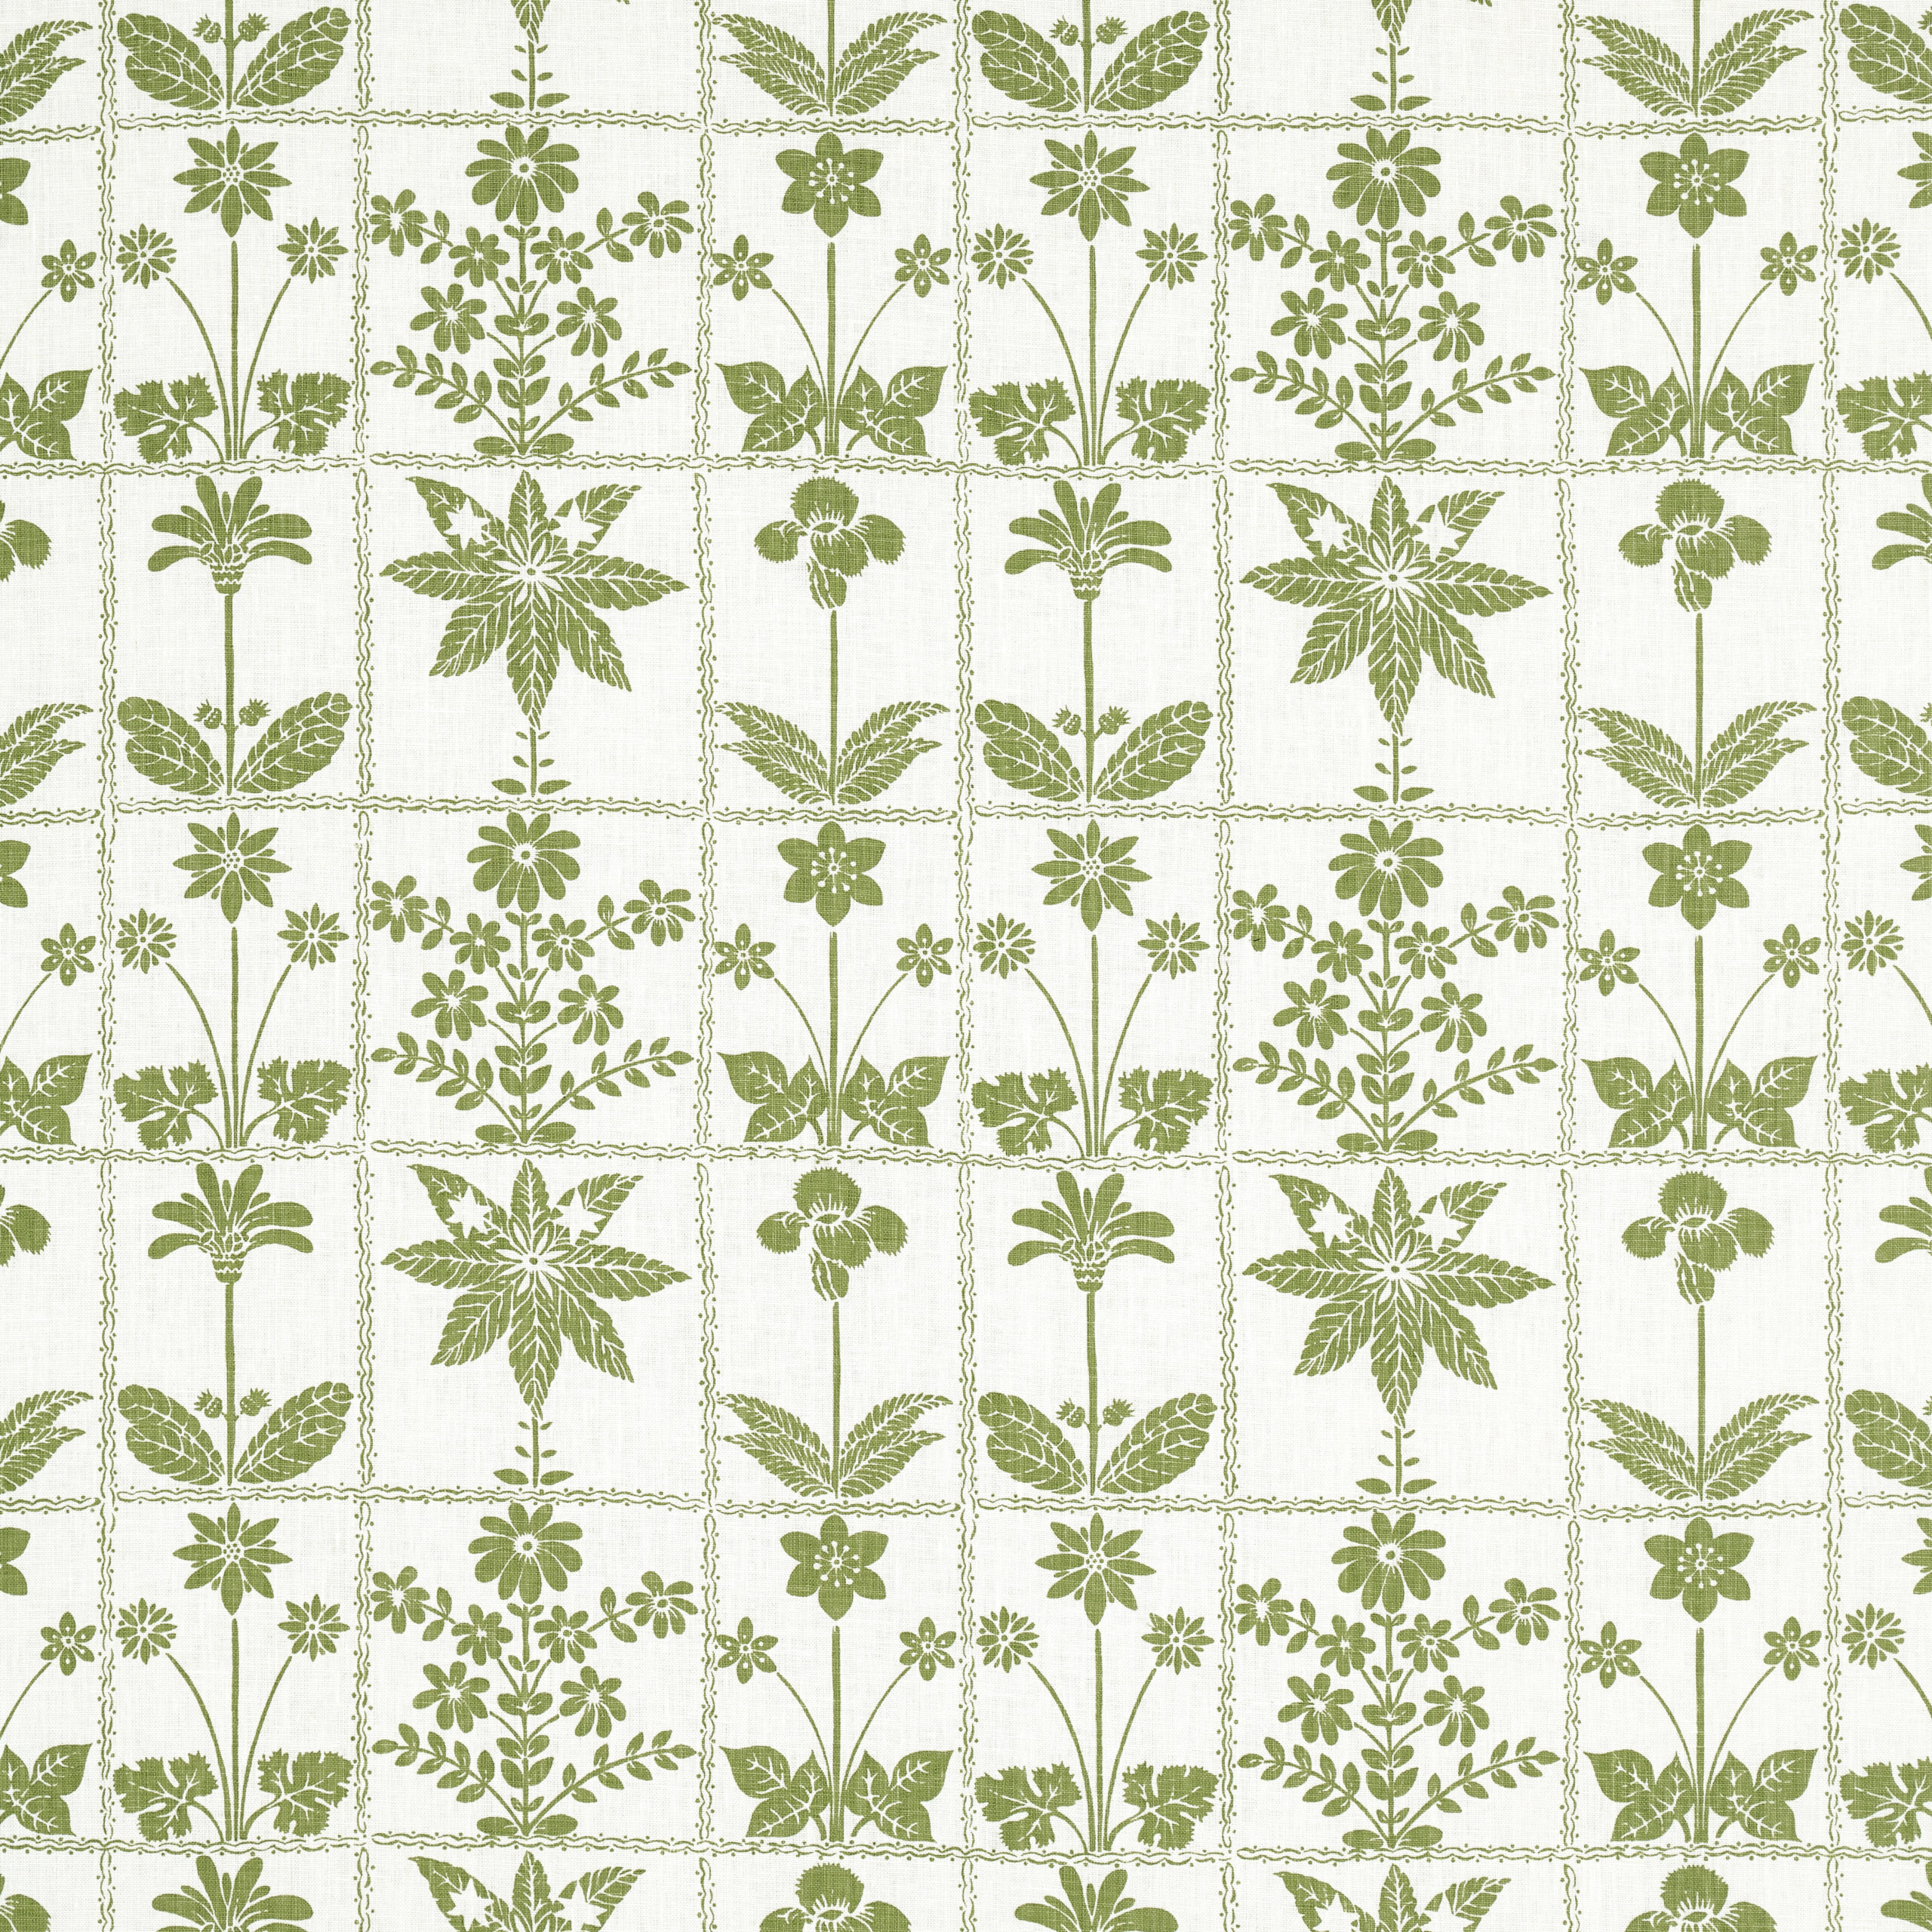 Schumacher Georgia Wildflowers in Leaf, from the Folly Cove collection